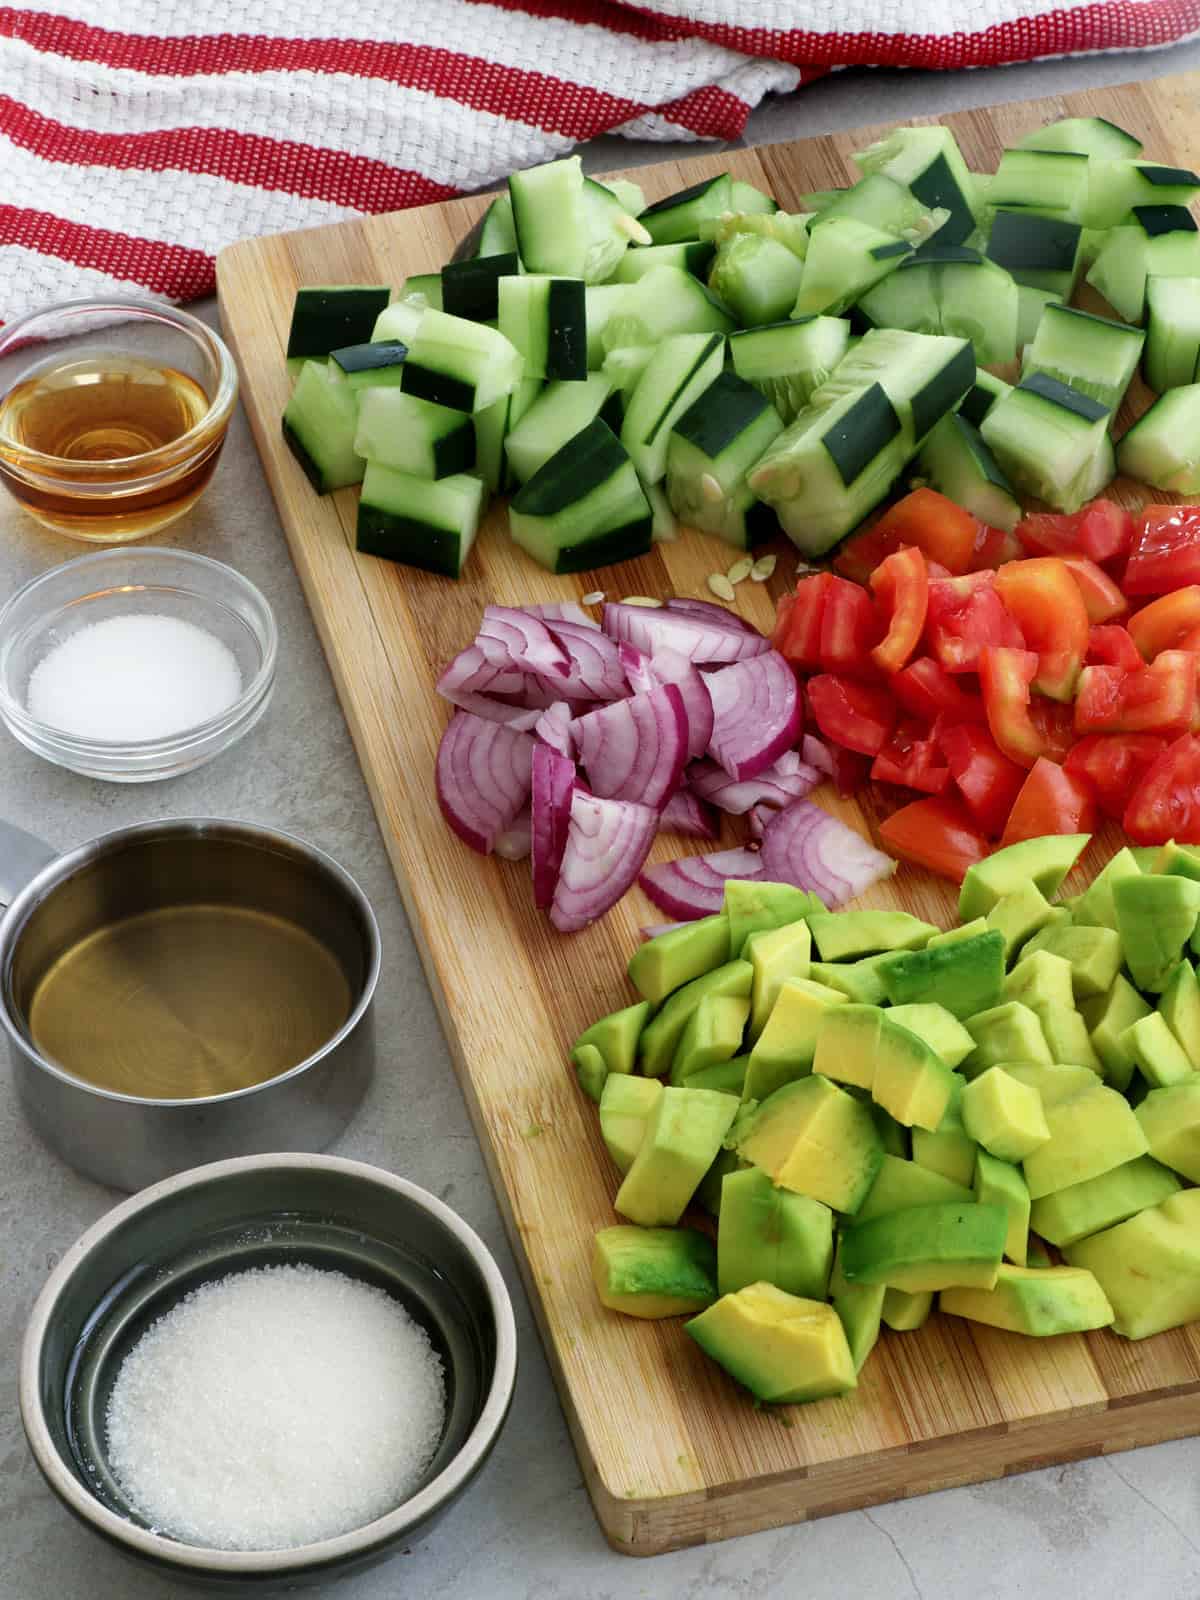 diced cucumbers, red onions, tomatoes, cucumbers on a wooden board with bowls of sugar, salt, pepper, and sesame oil on the side